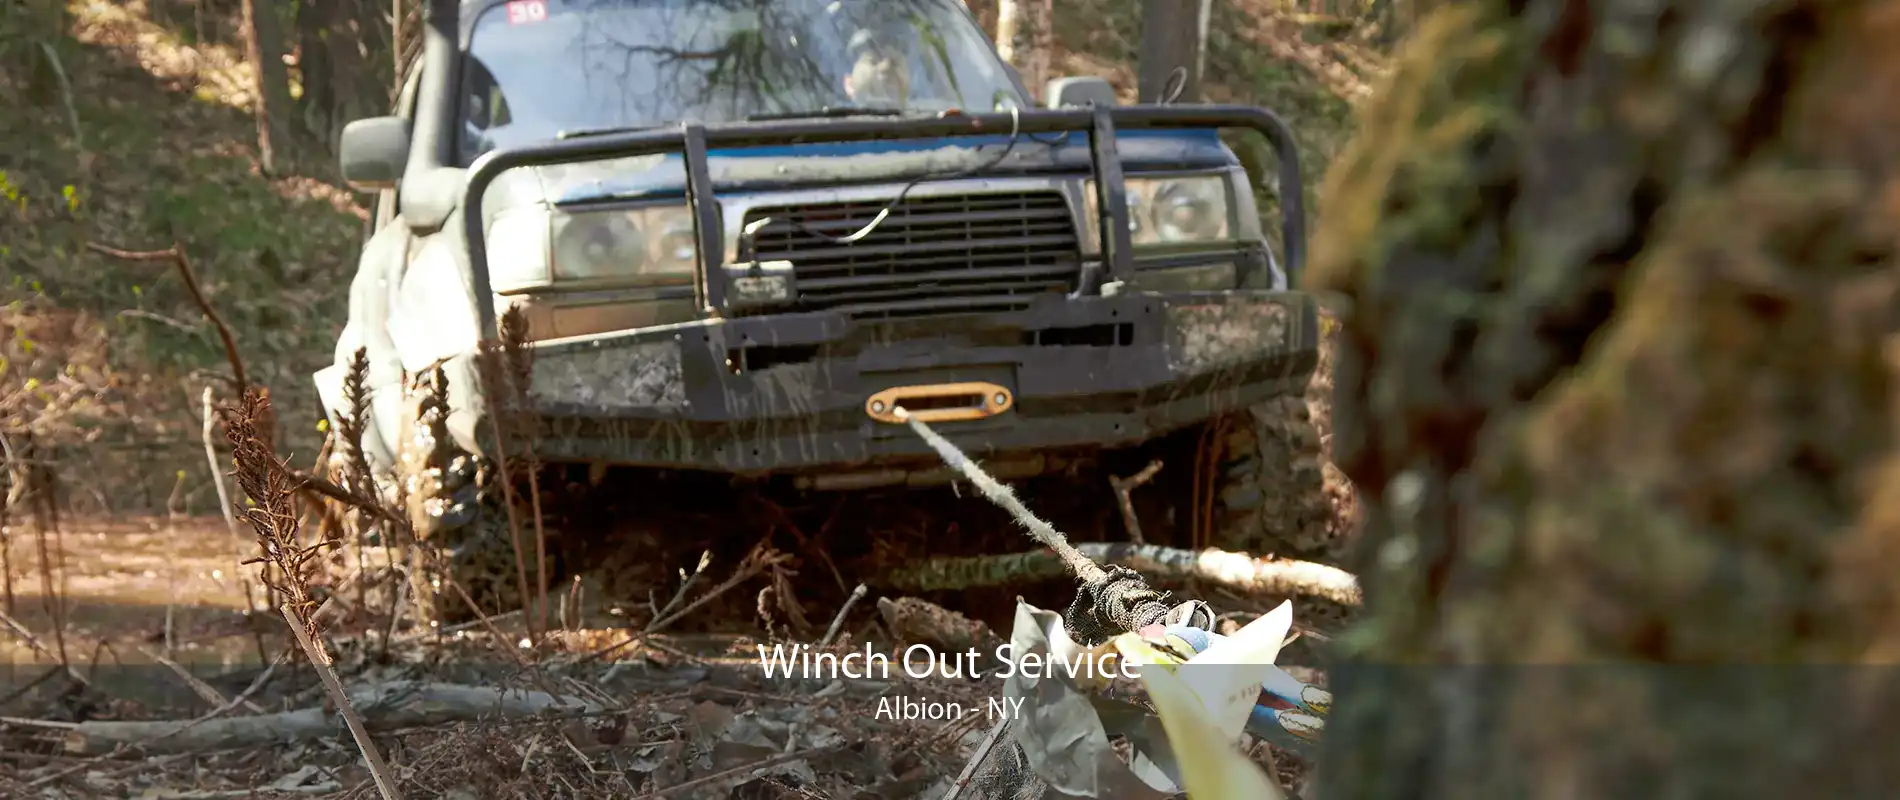 Winch Out Service Albion - NY